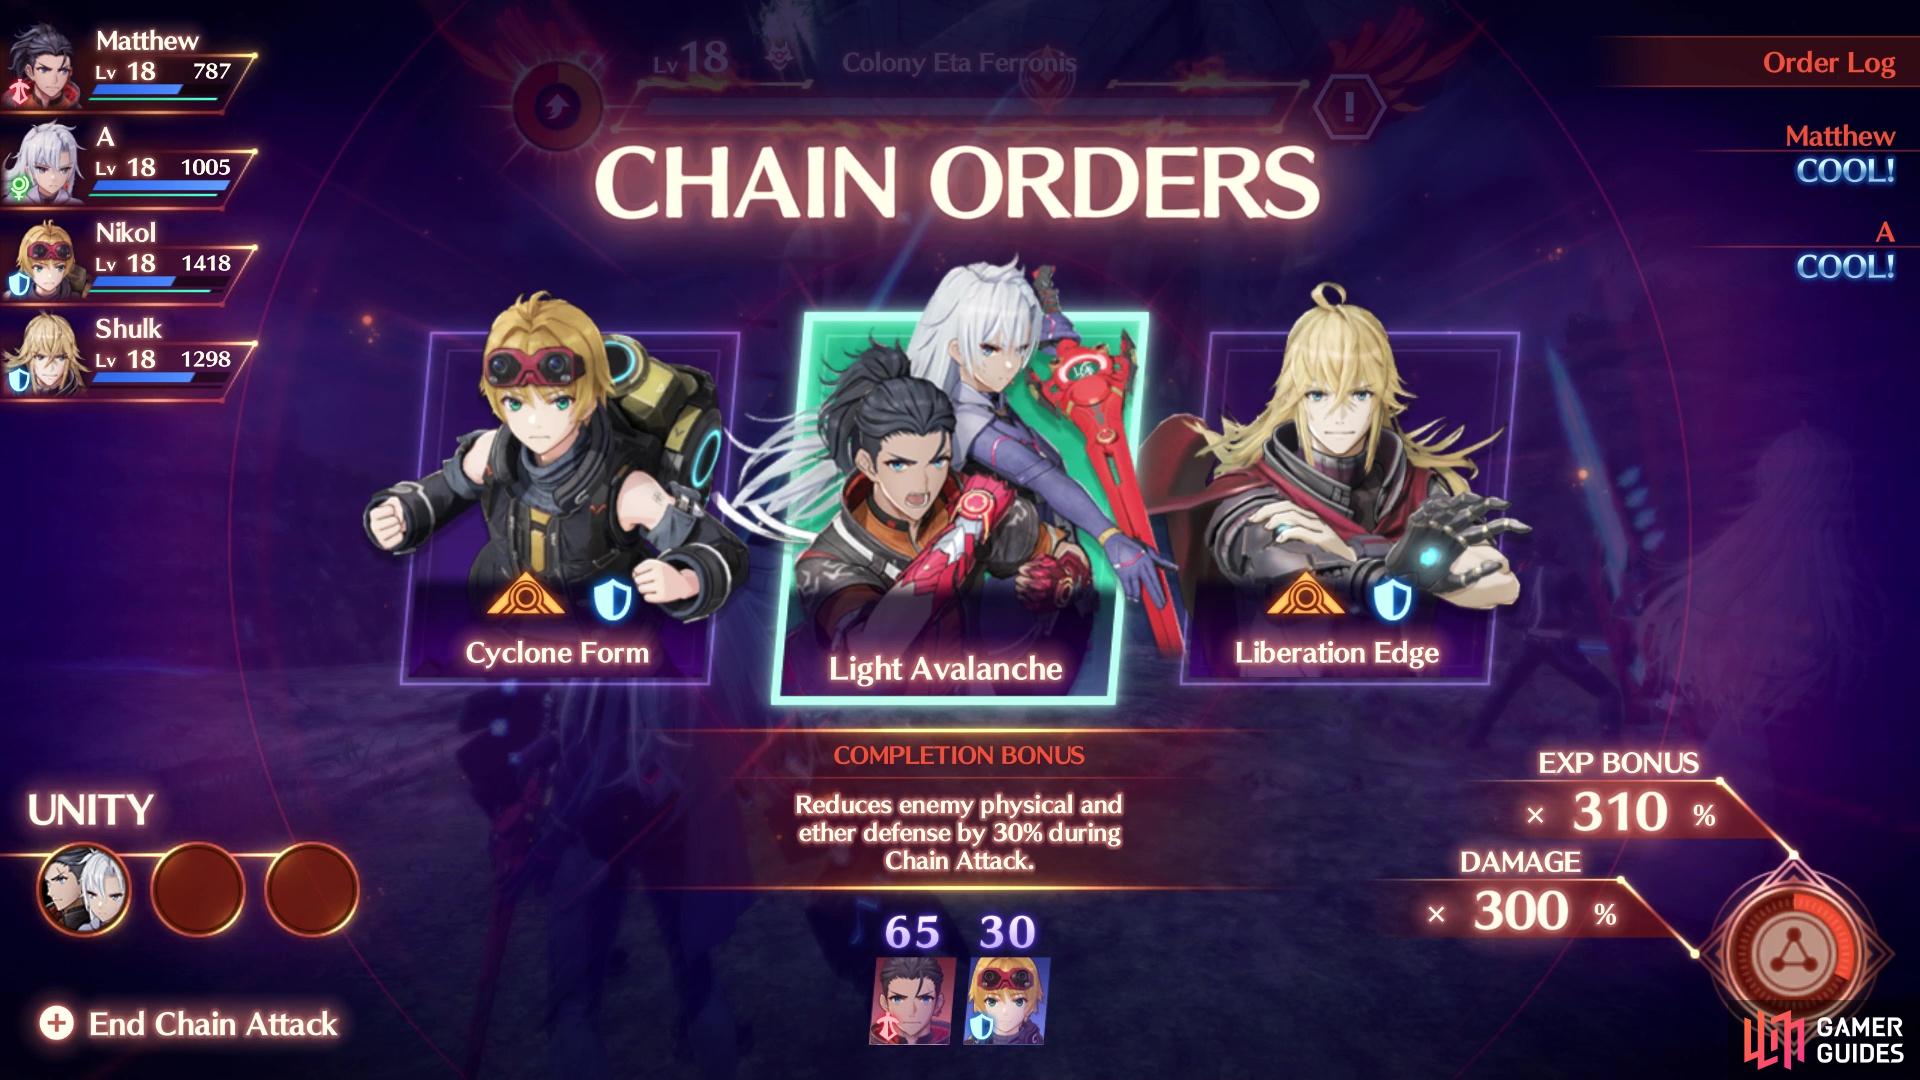 You want to make sure you get the Unity Order for the finale of the Chain Attack